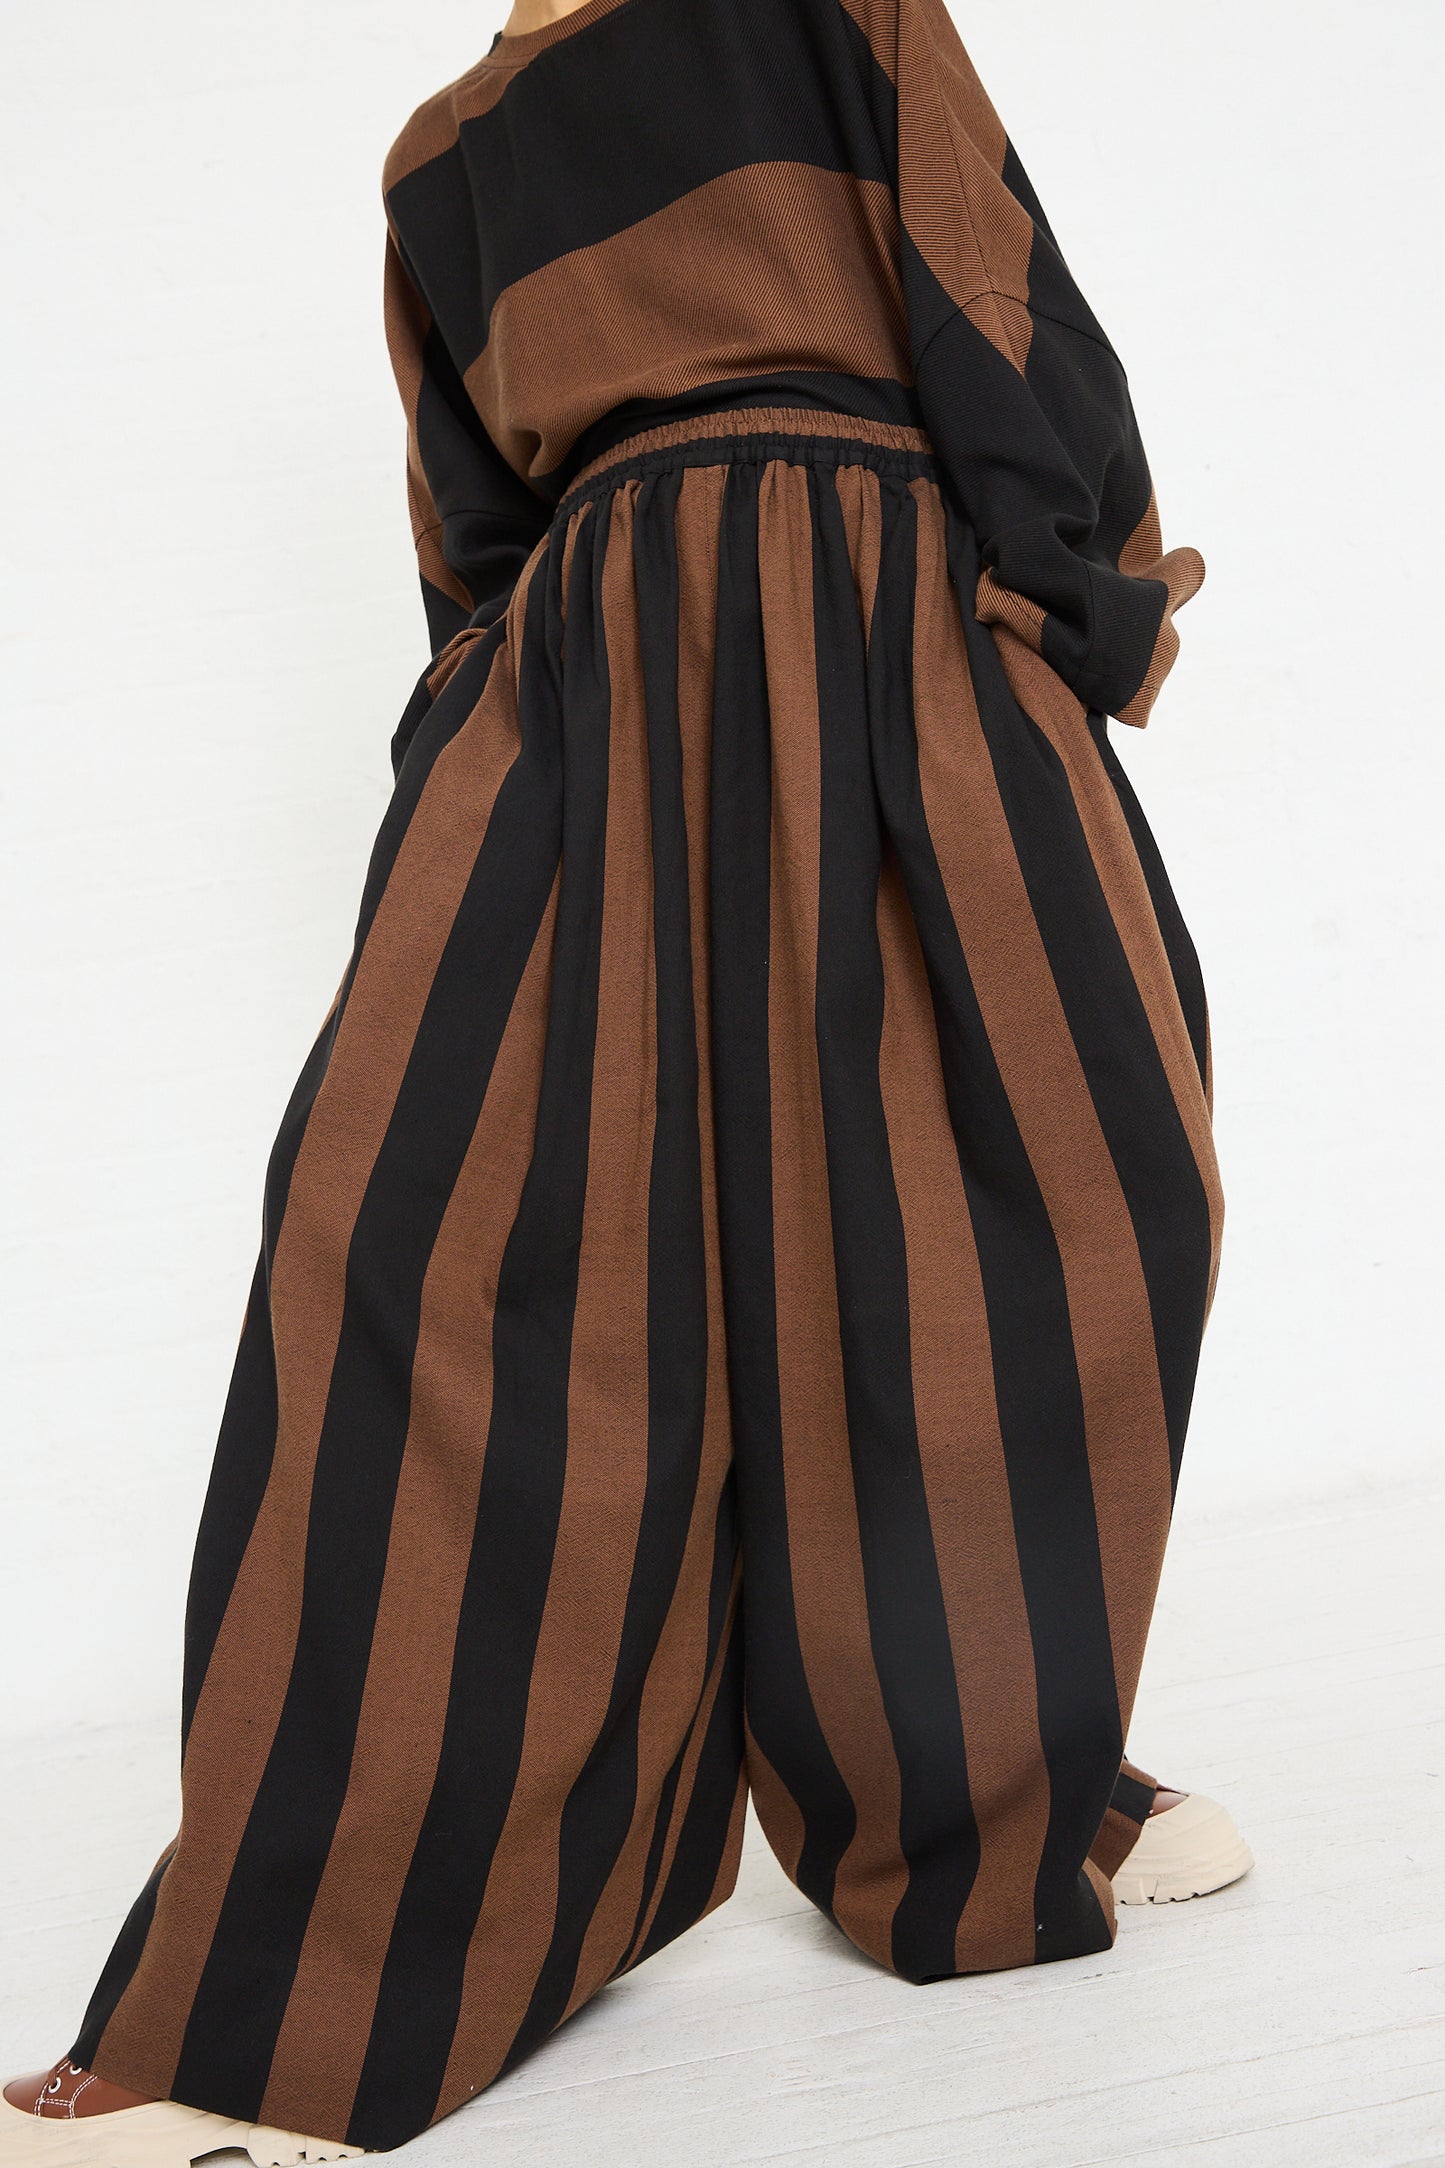 Woman wearing Marrakshi Life Drawstring Pleated Pant in Black and Brown Stripe, viewed from behind.